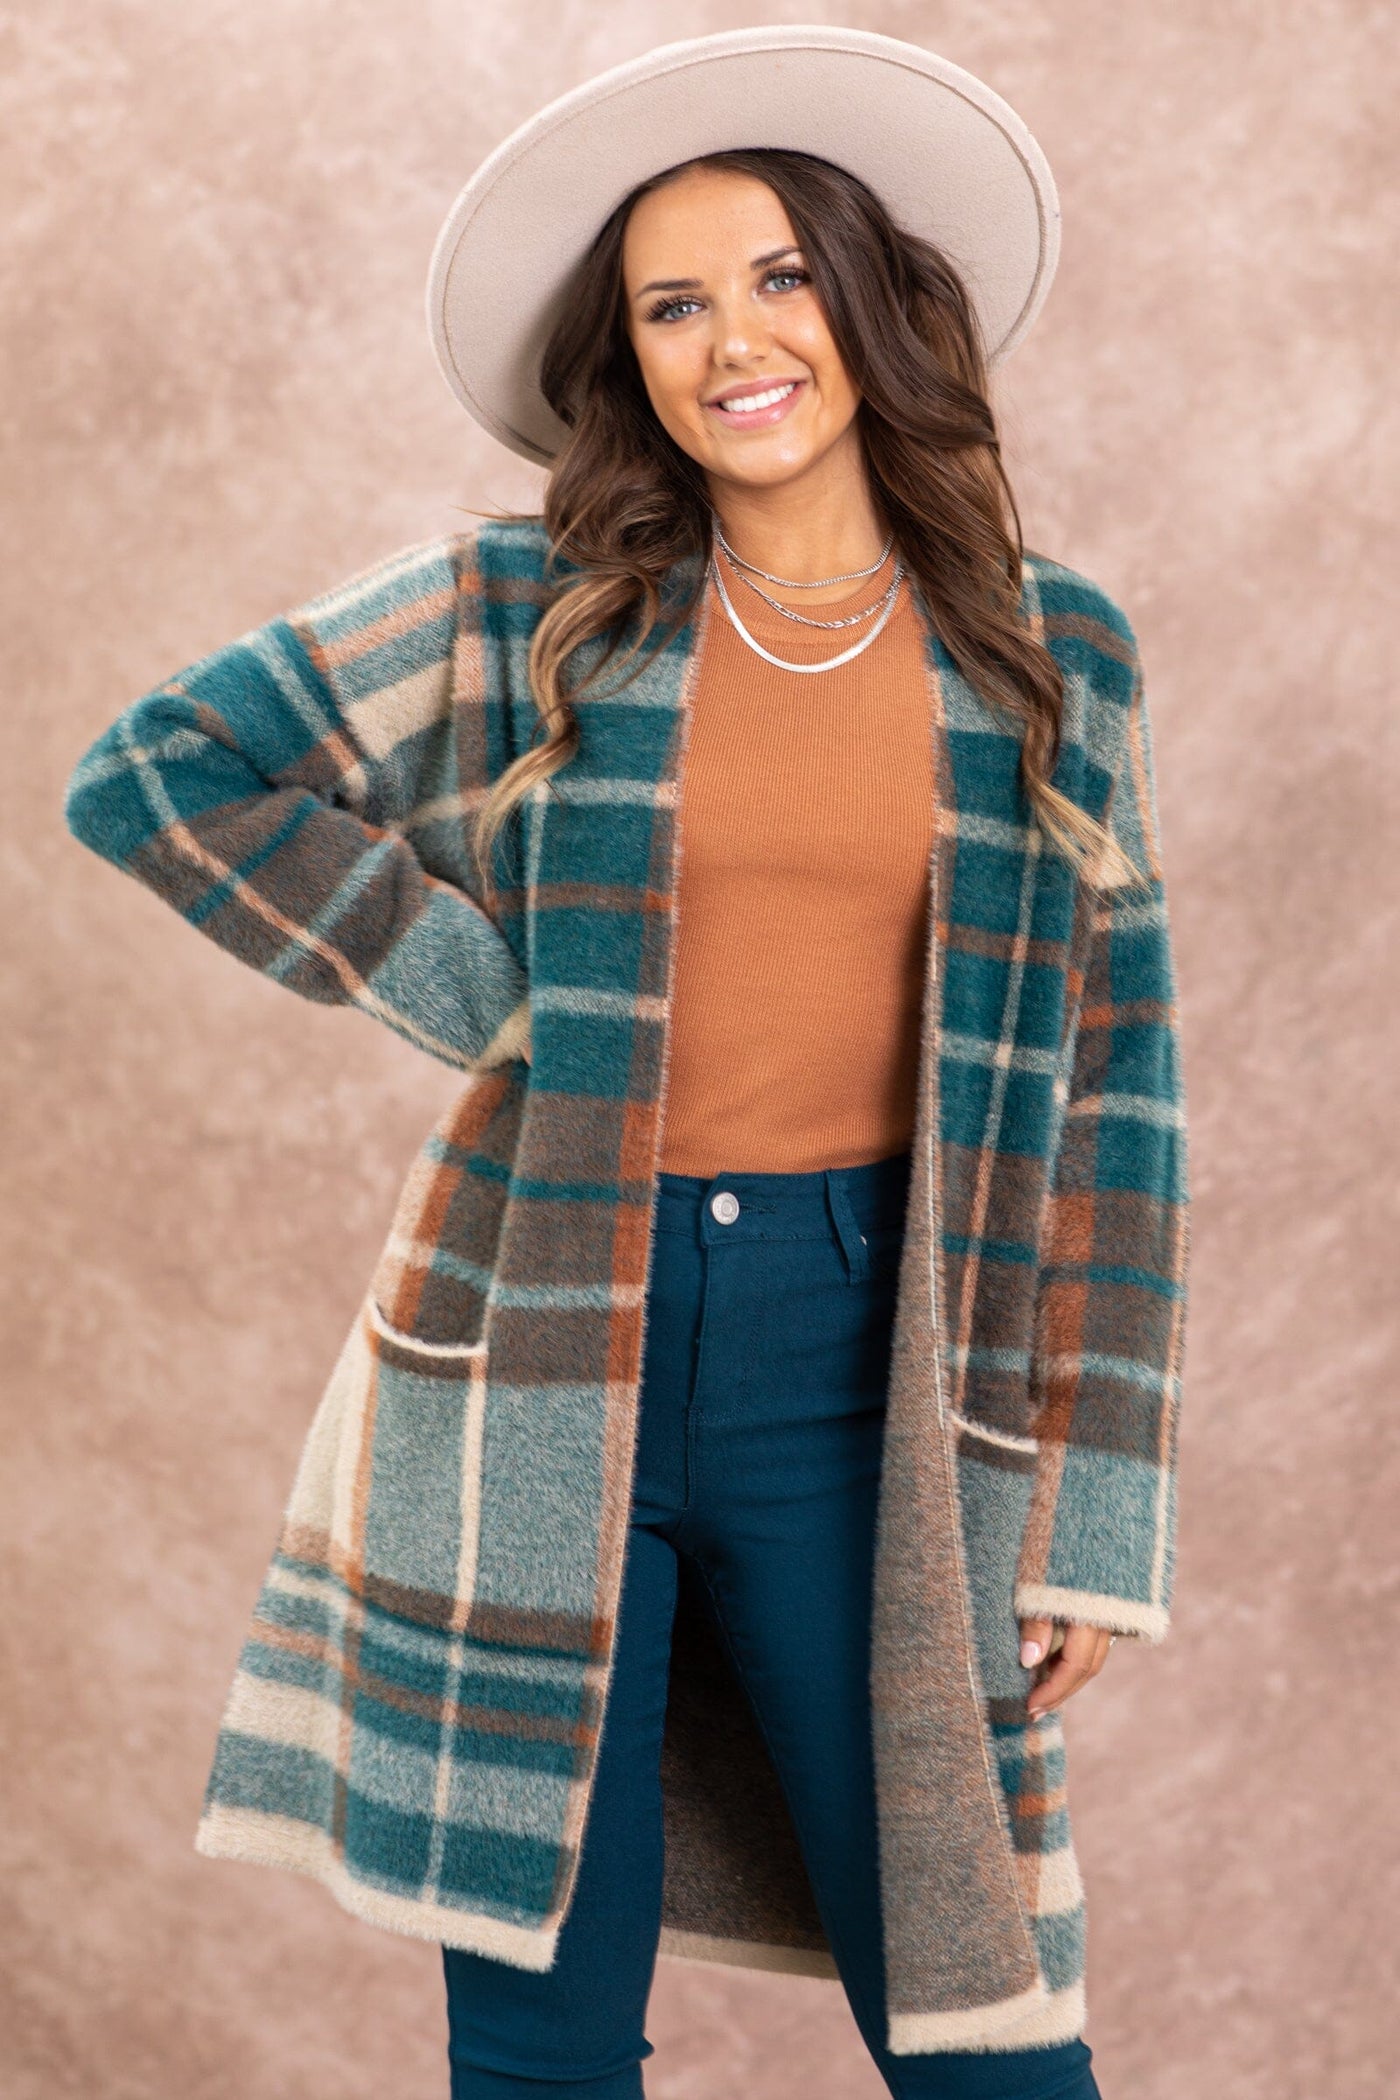 Teal and Cognac Plaid Cardigan With Pockets - Filly Flair